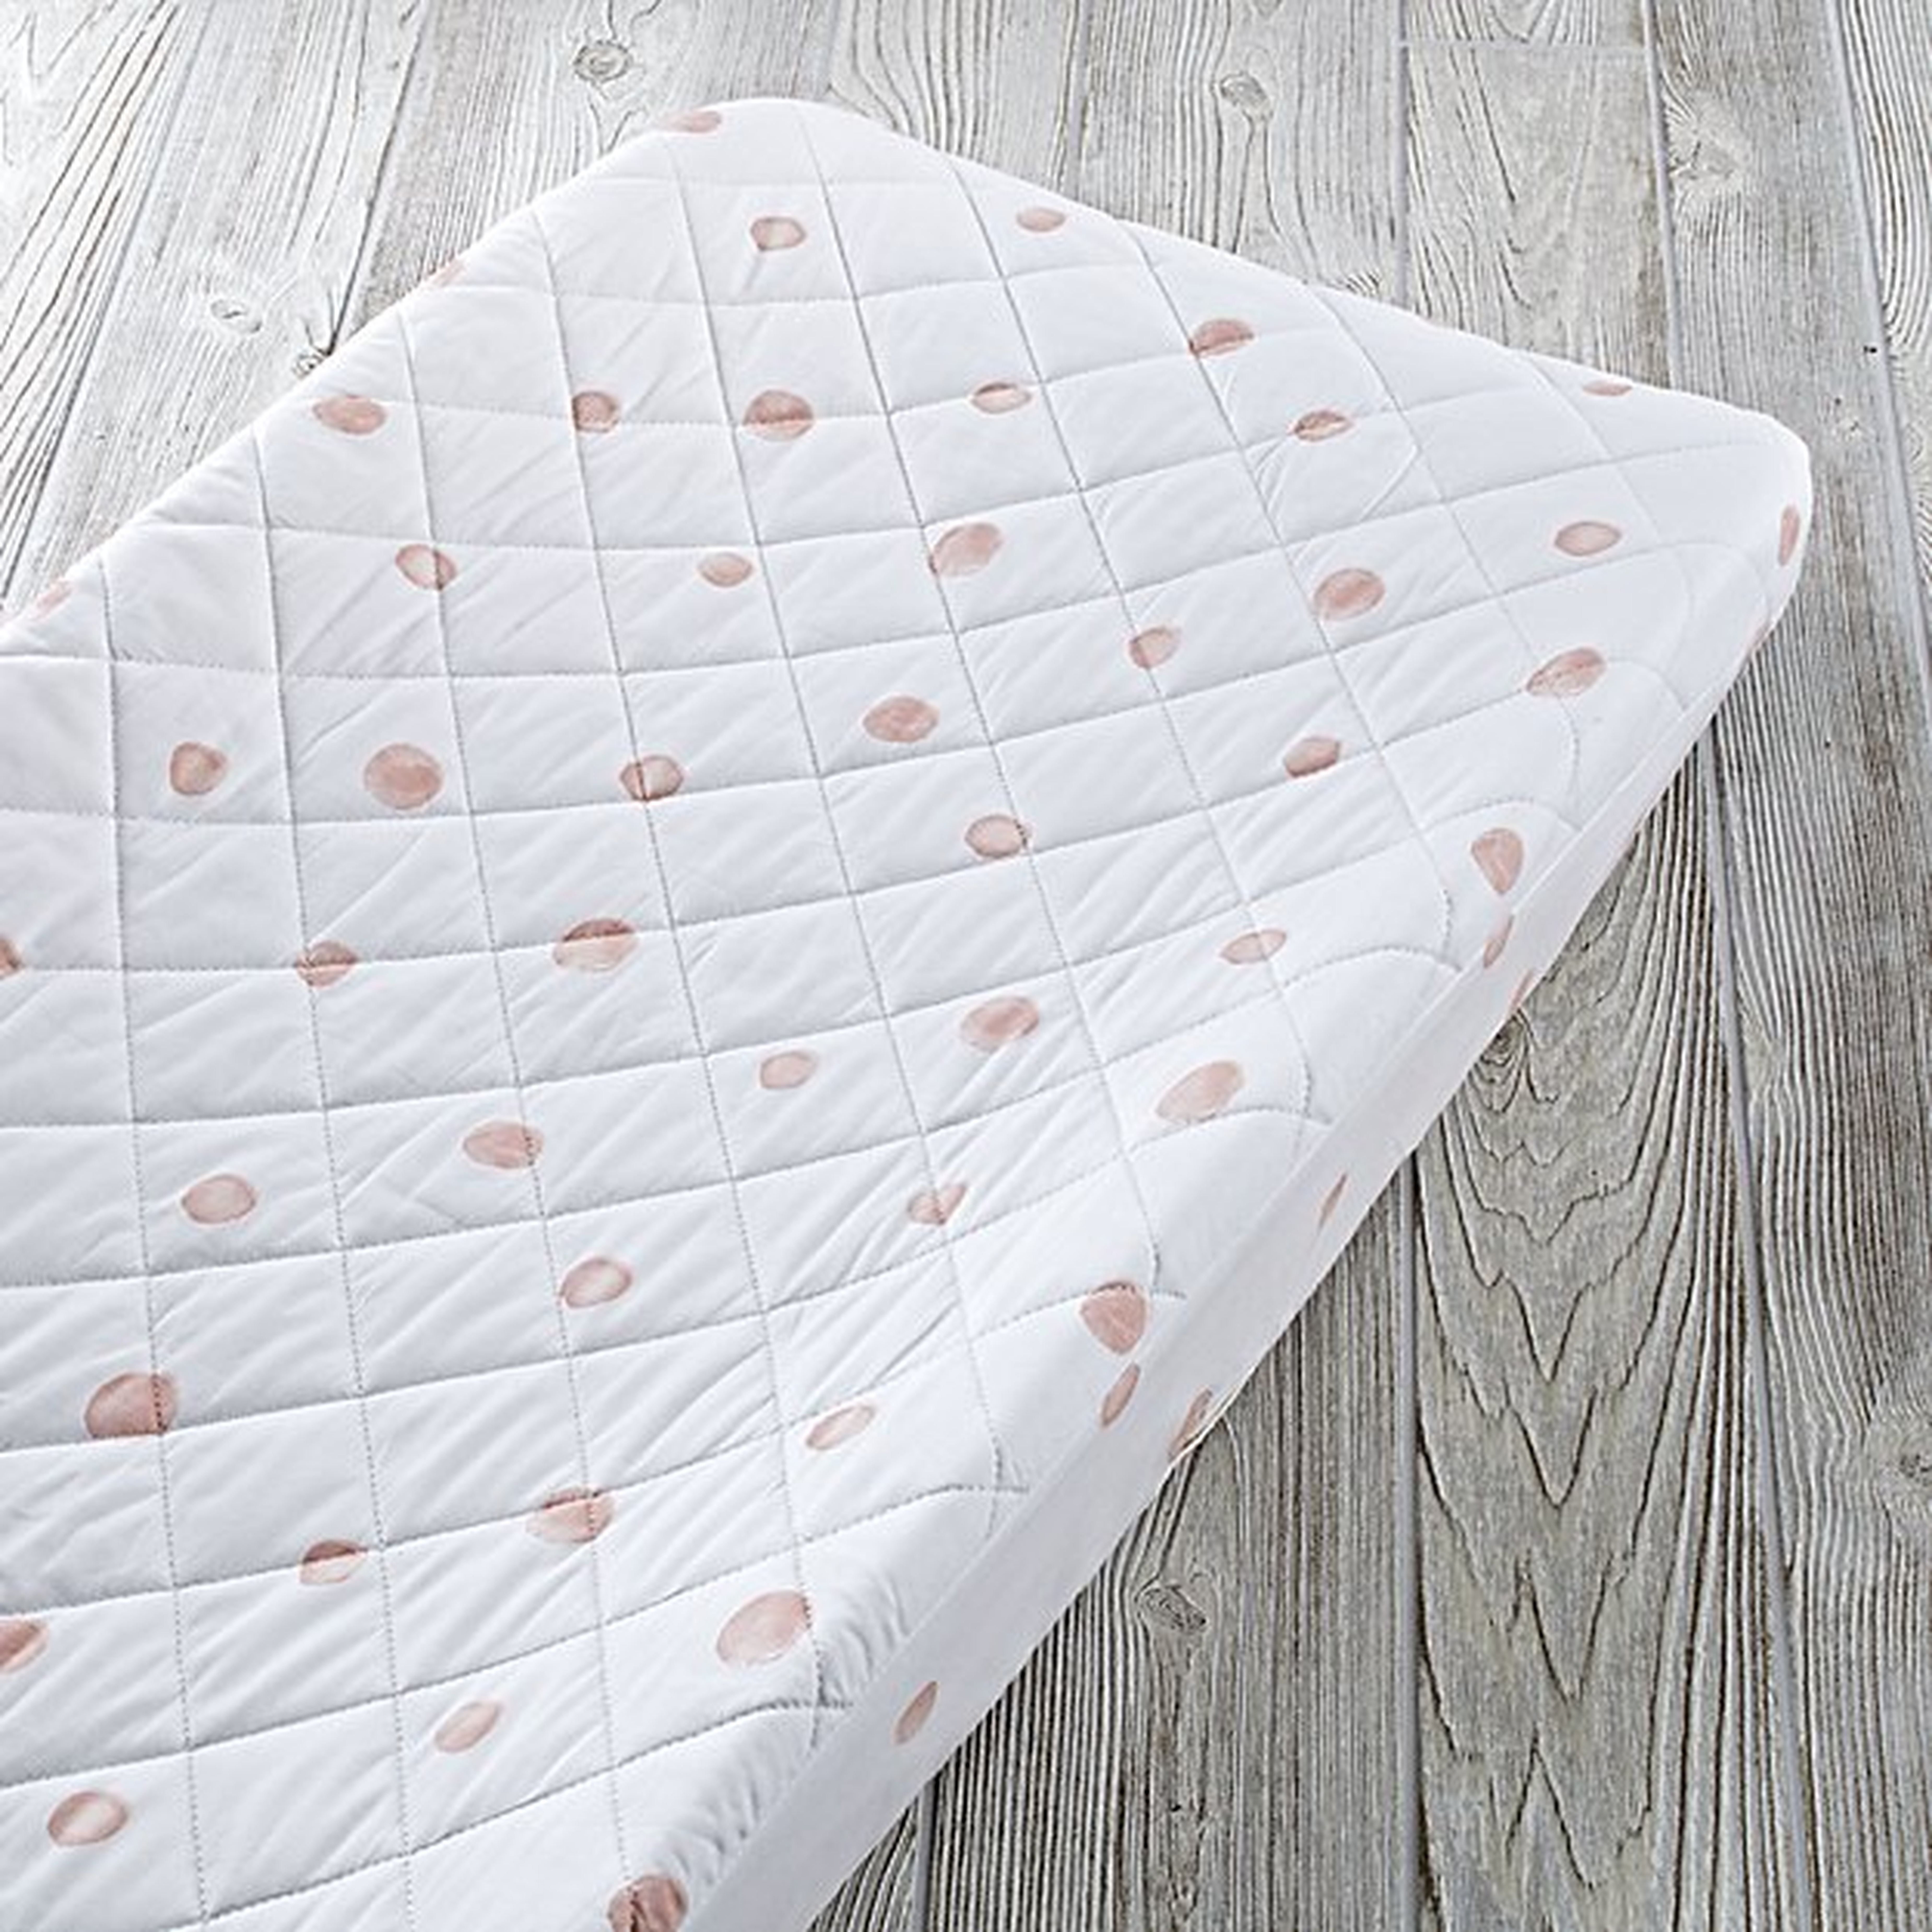 Pink Polka Dot Changing Pad Cover - Crate and Barrel